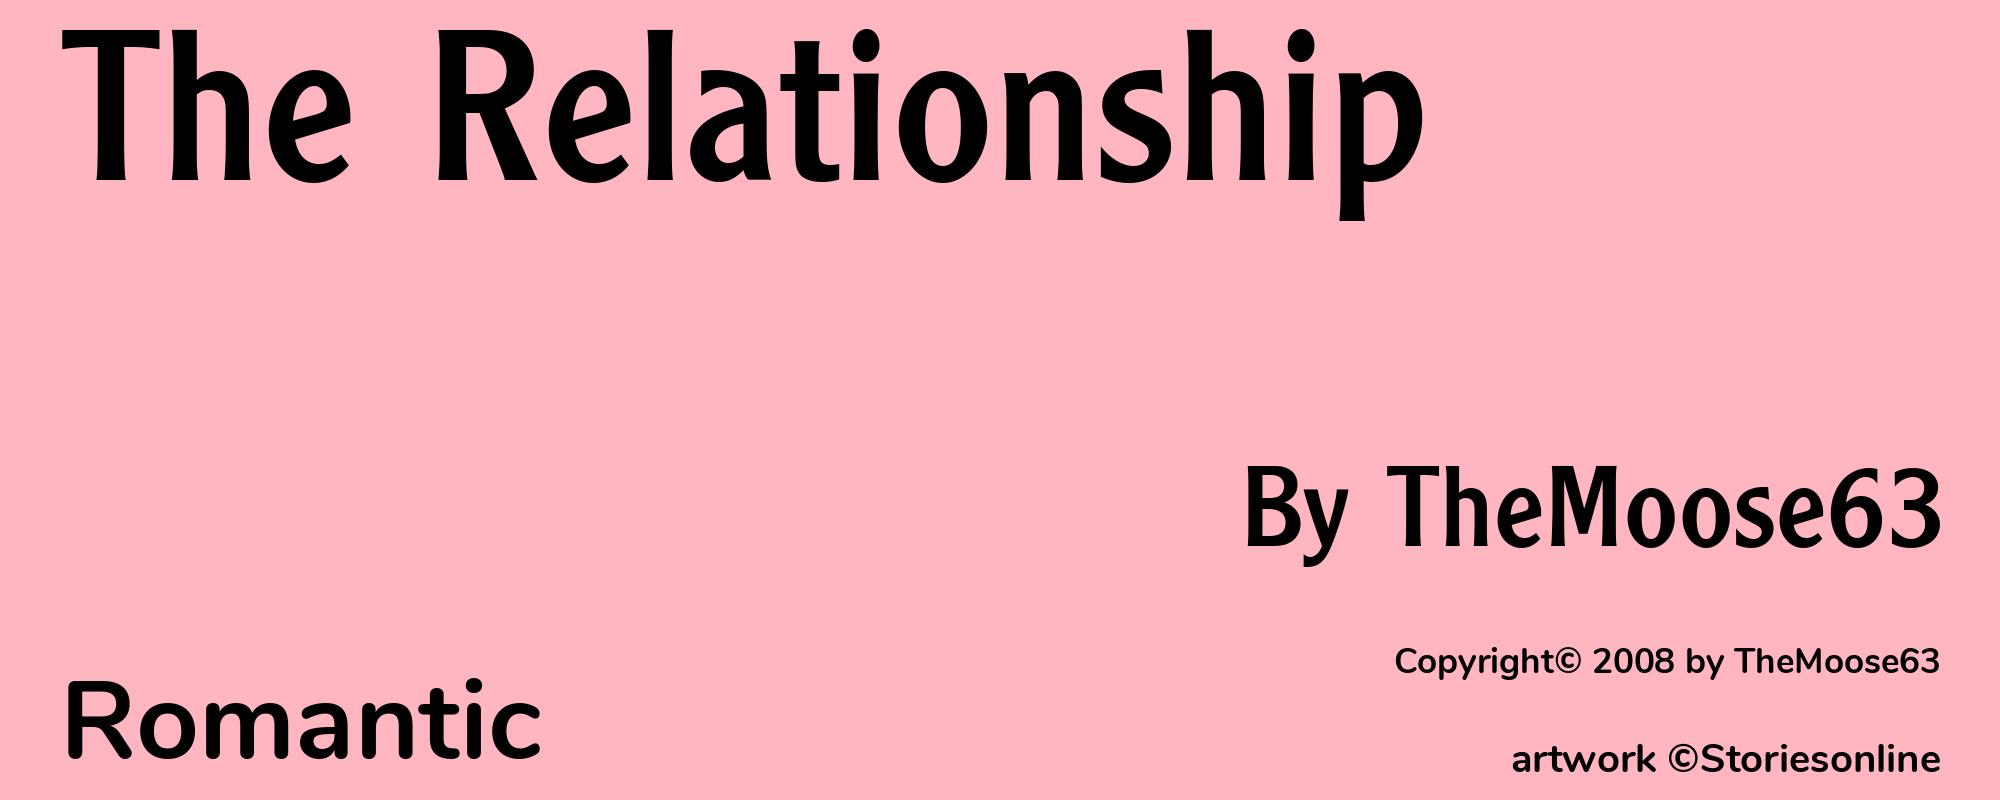 The Relationship - Cover